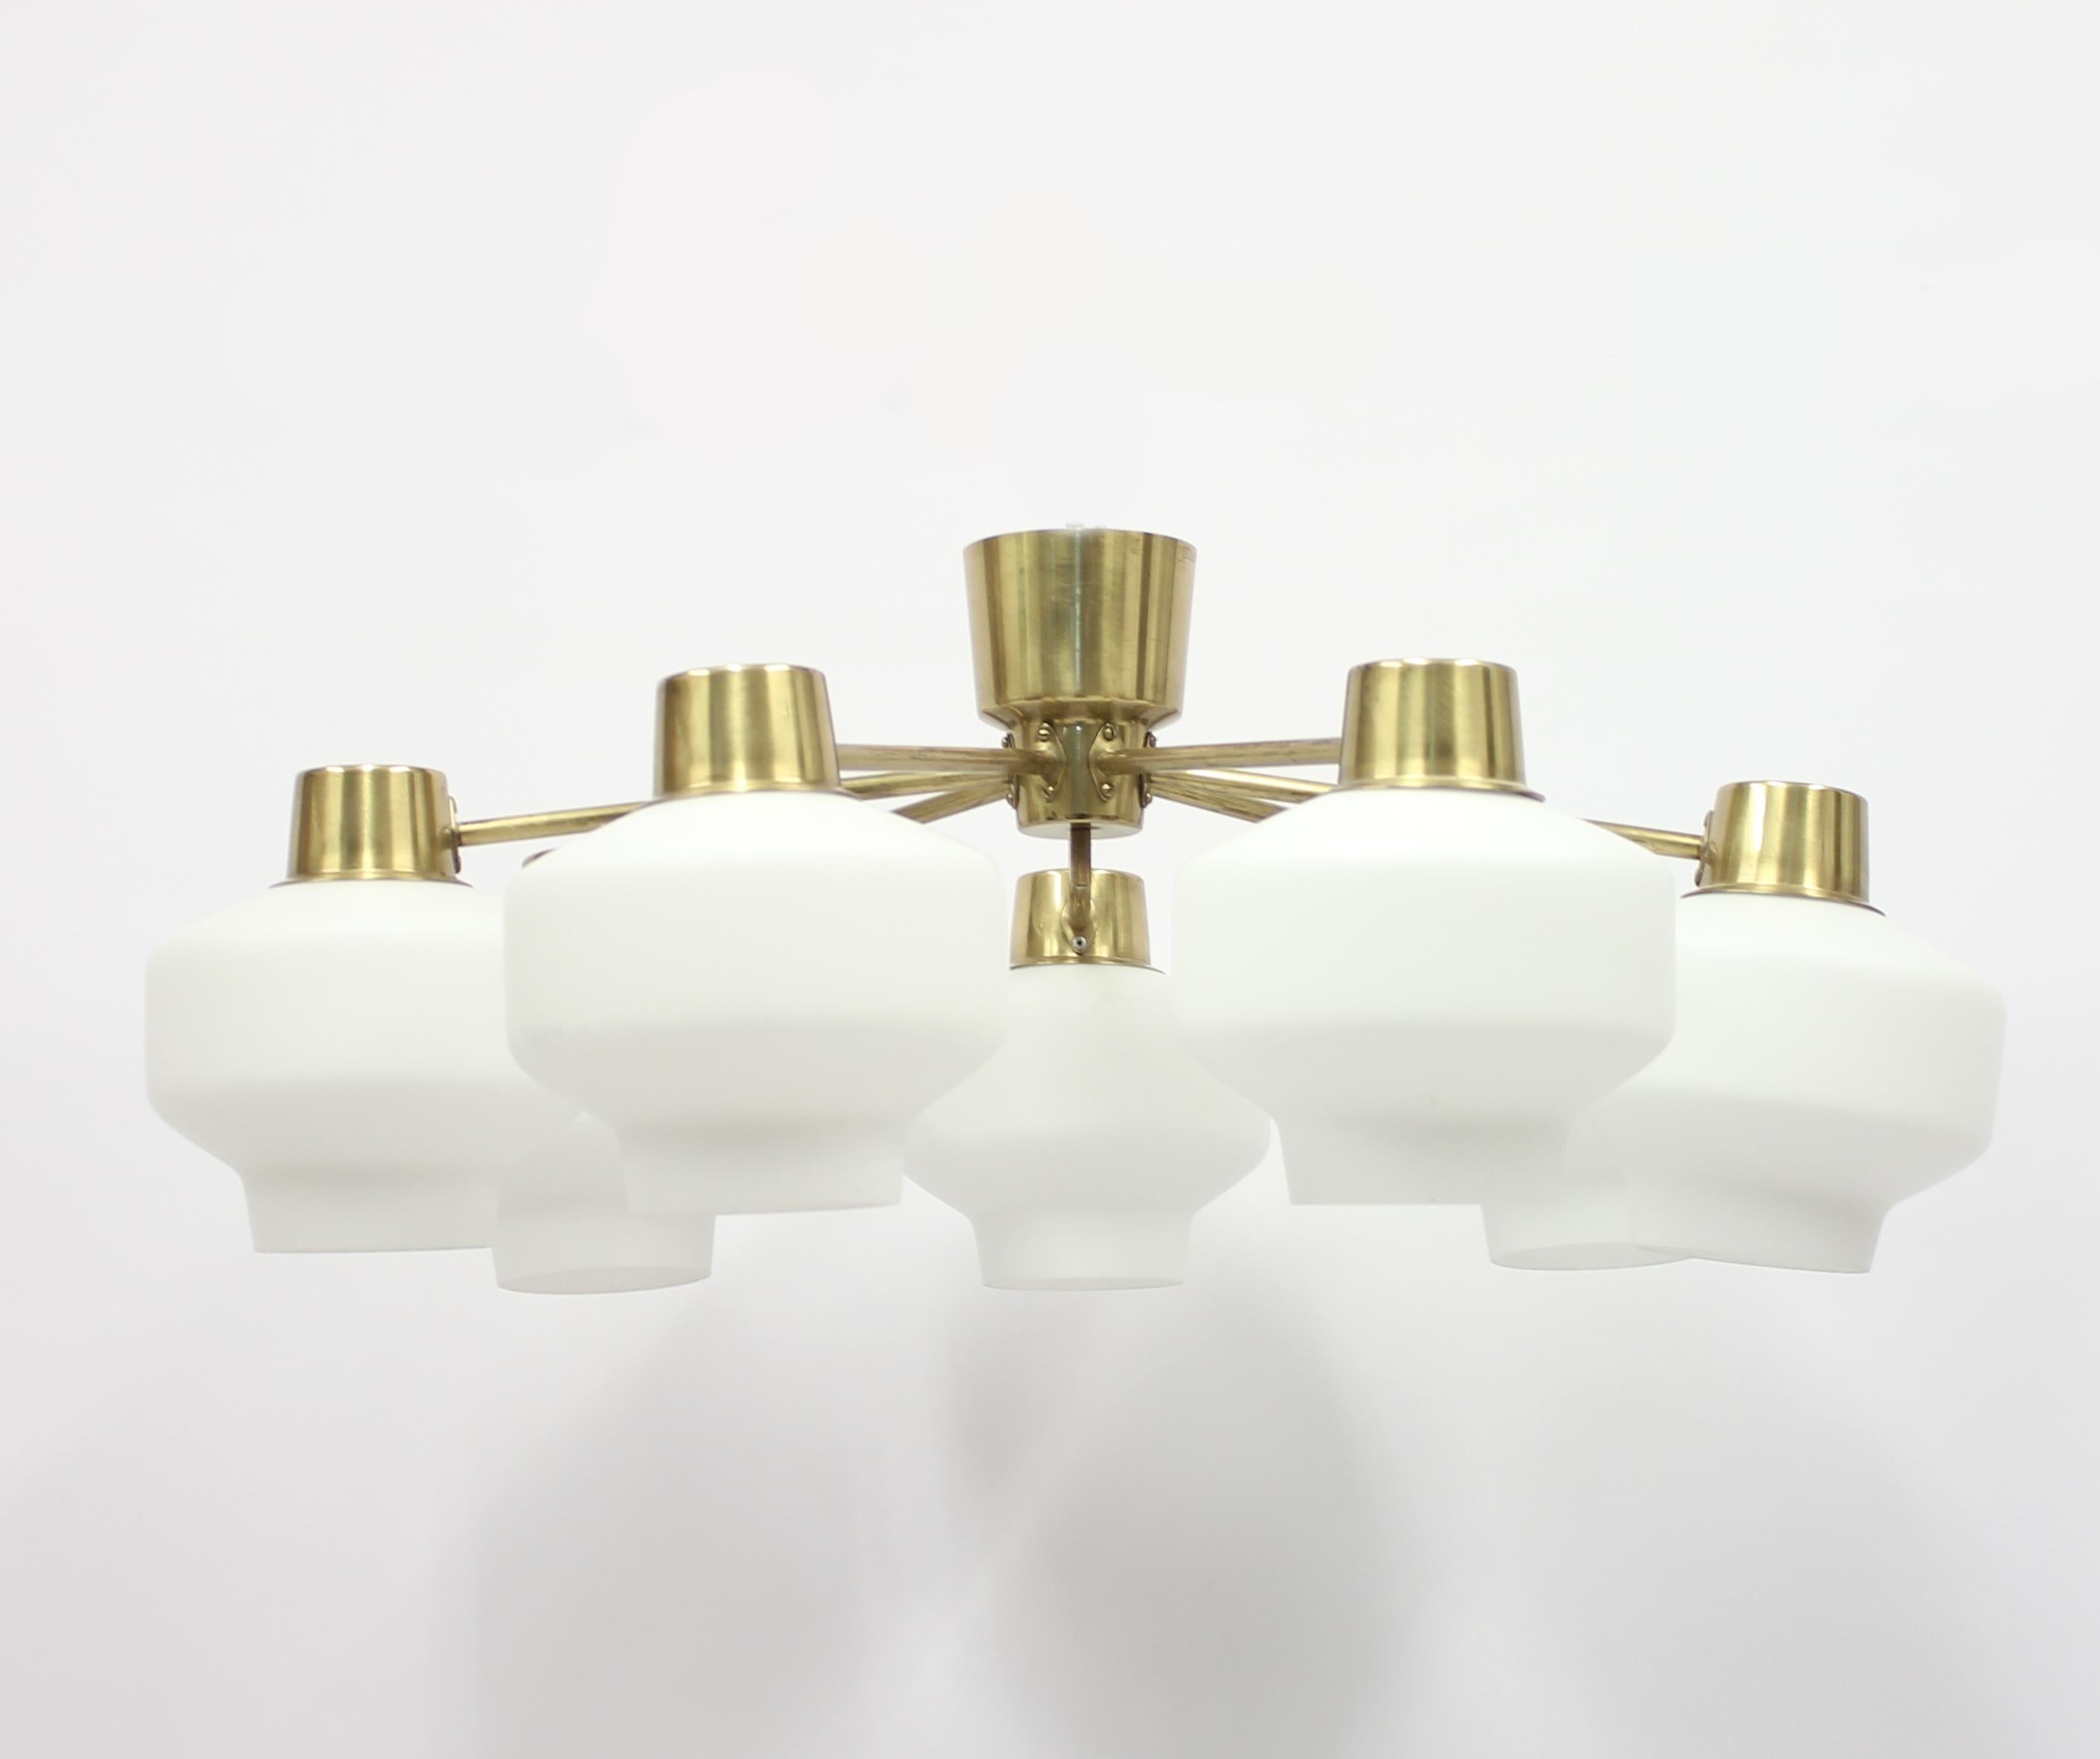 Mid-20th Century Swedish Seven-Light Brass Ceiling Light by ASEA, 1950s